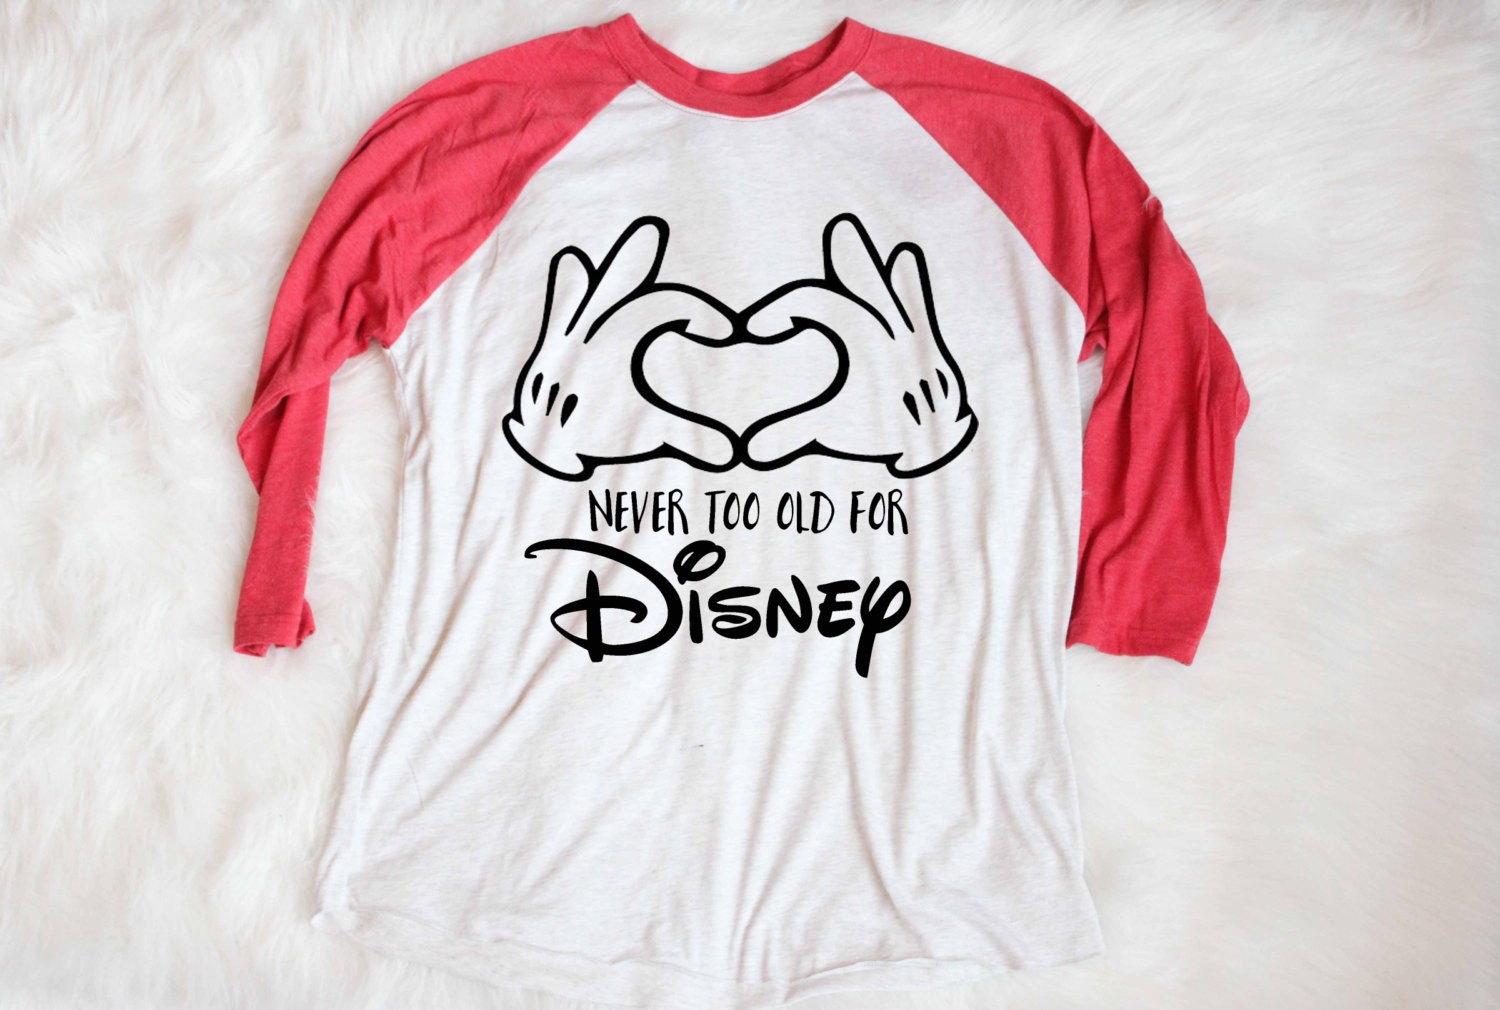 Never Too Old For Disney Shirt Free Shipping Adult Disney 7304